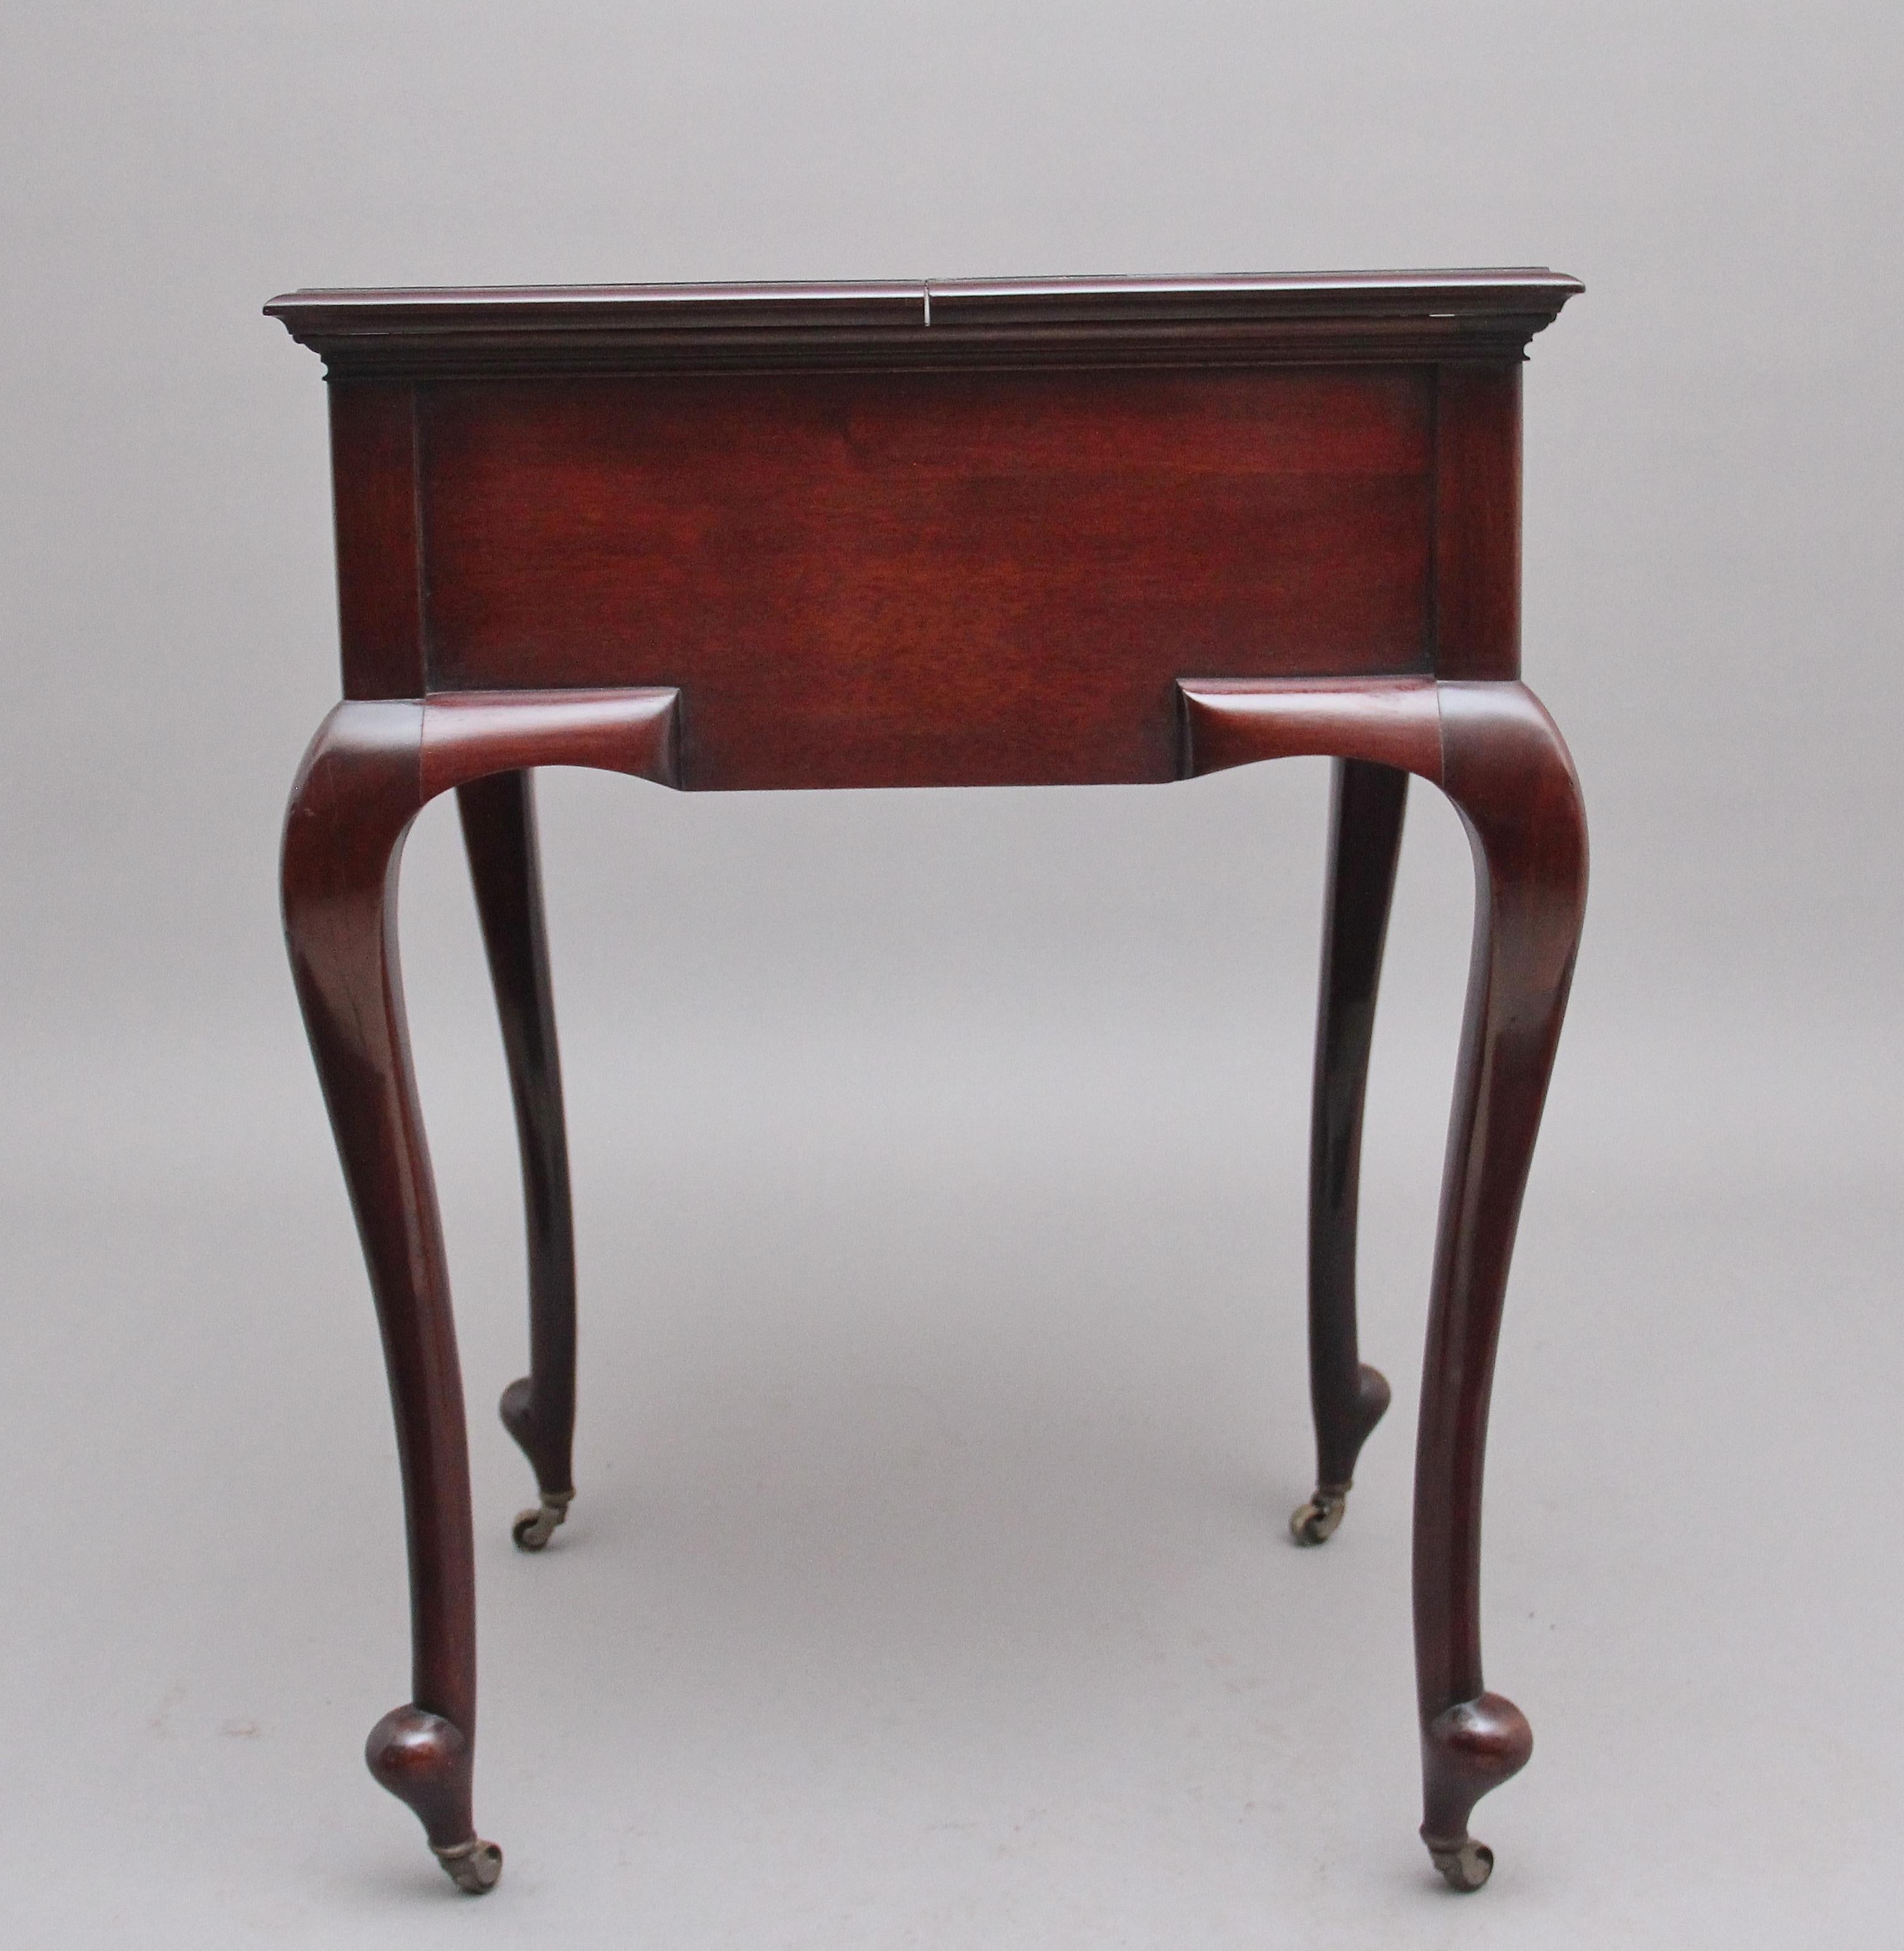 Edwardian Early 20th Century Metamorphic Writing Desk by J.C Vickery of London For Sale